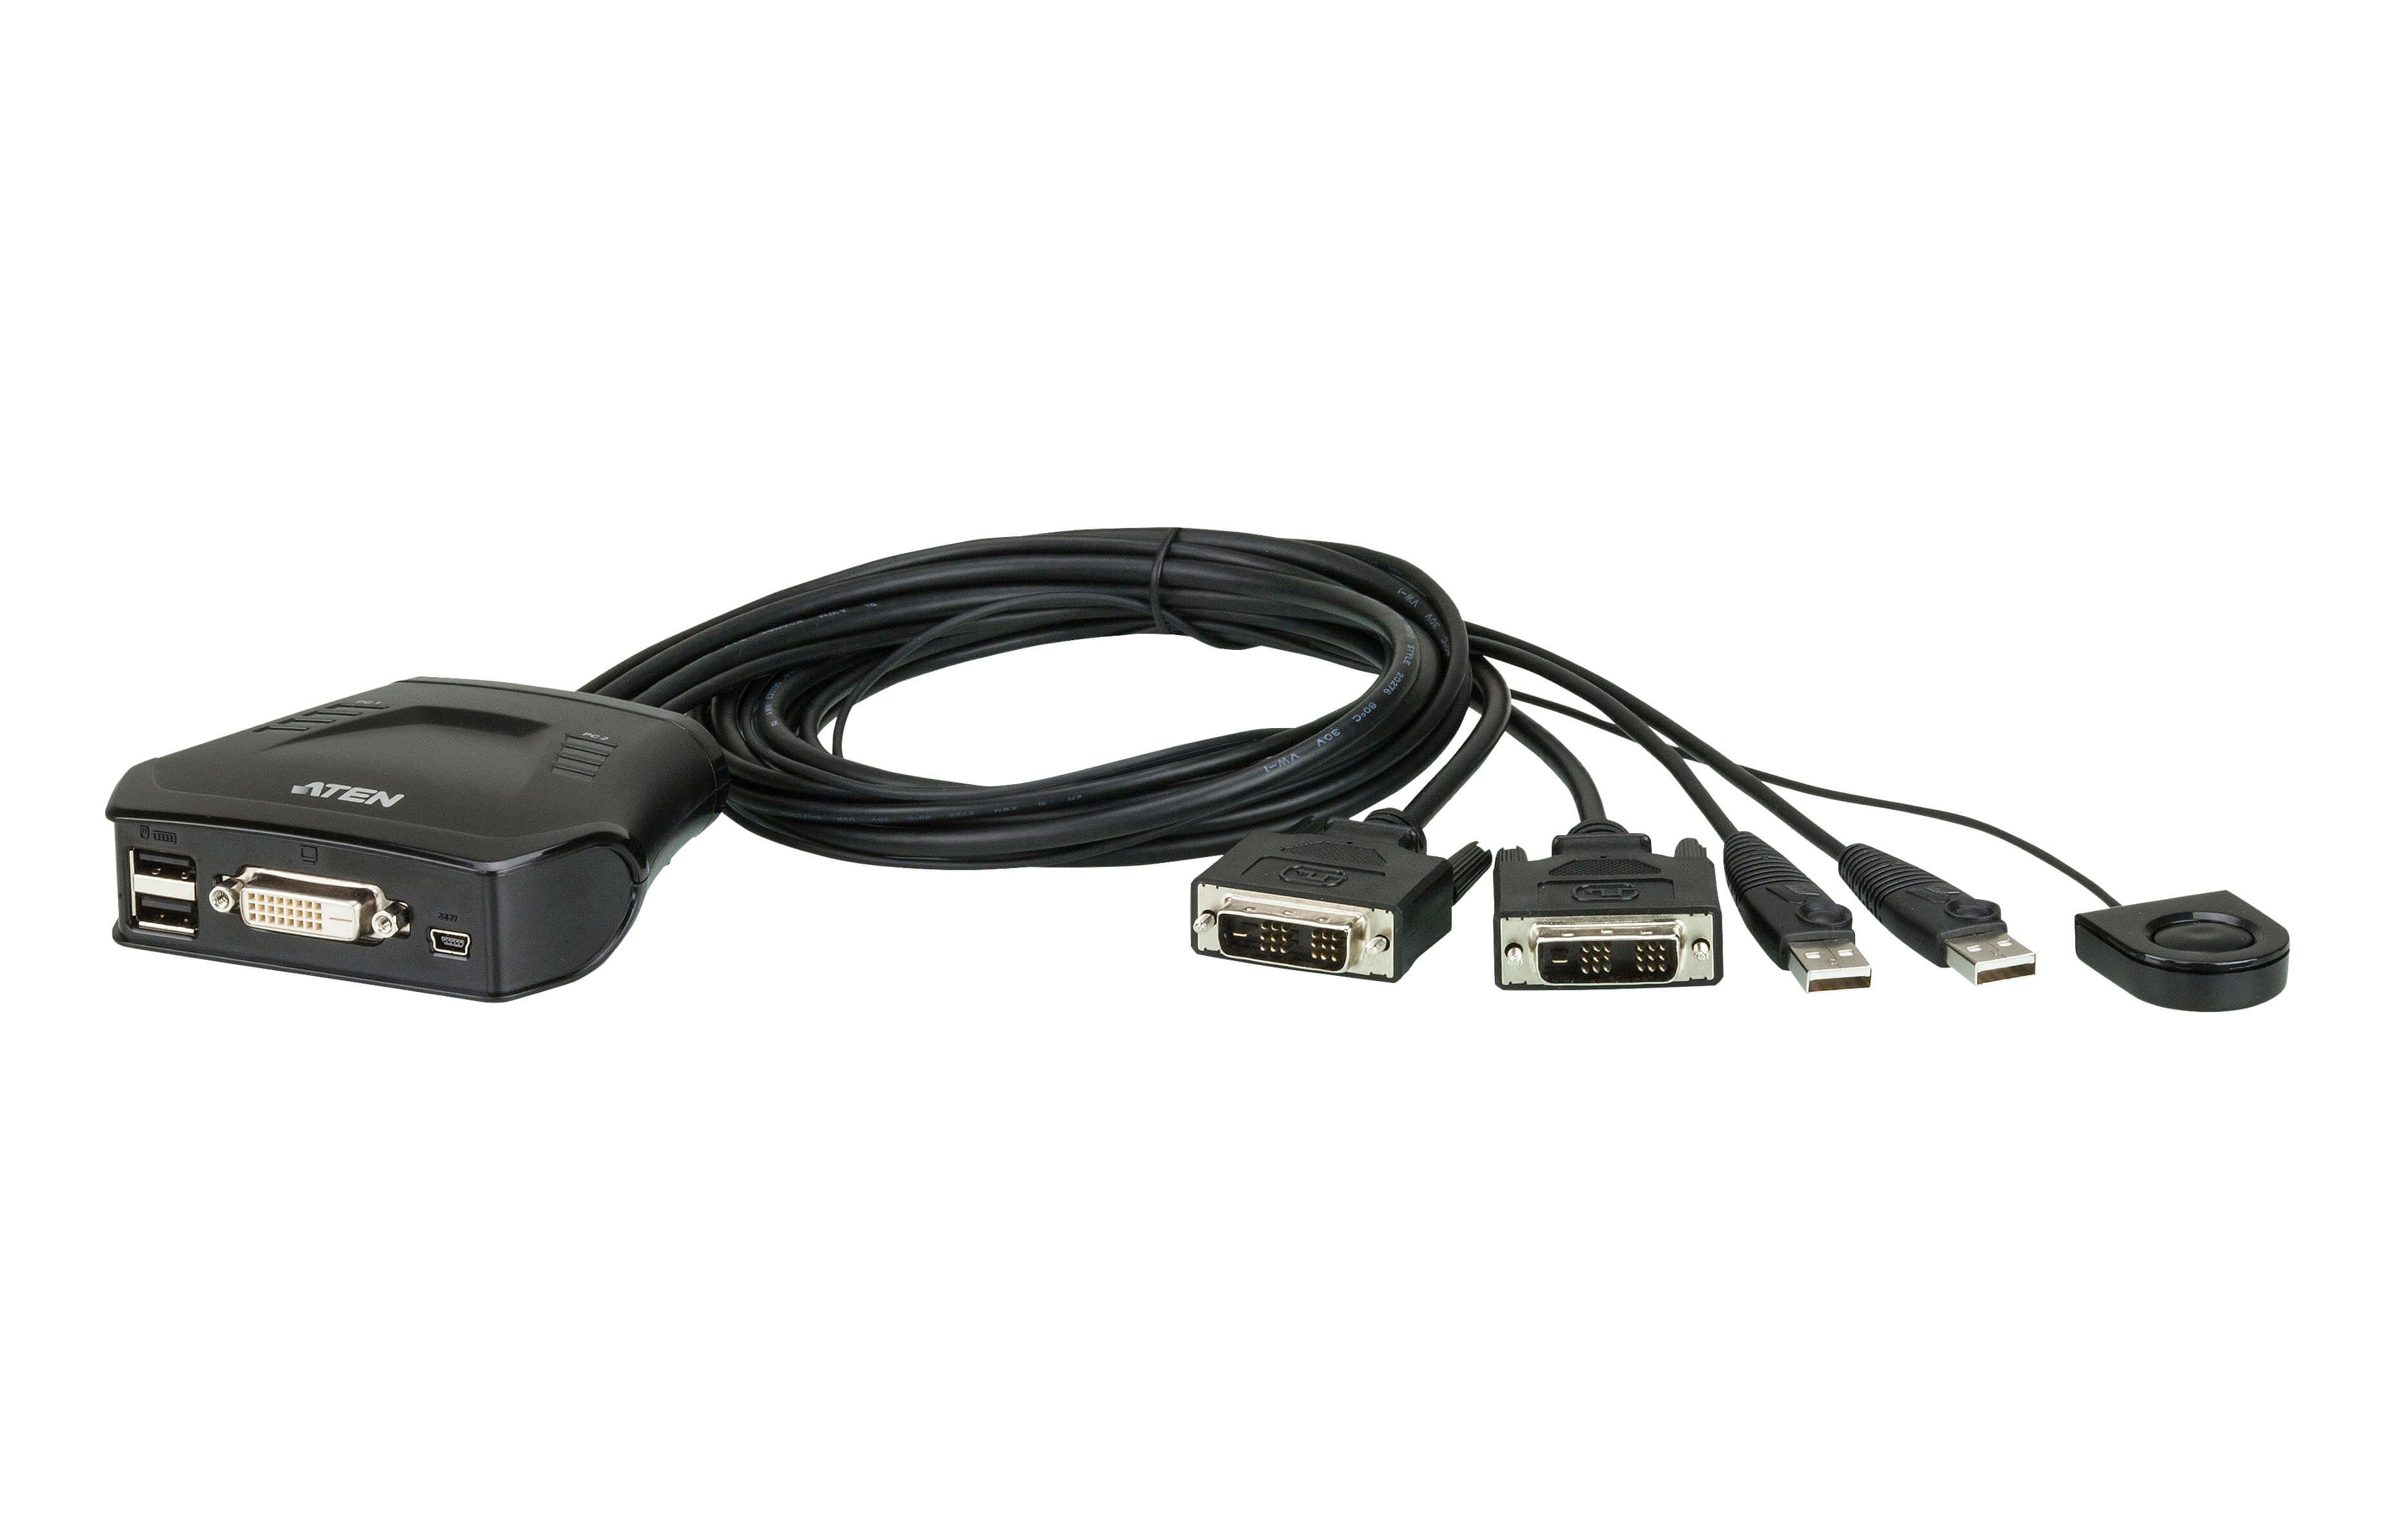 ATEN 2-Port USB DVI Cable KVM Switch with Remote Port Selector A-Power  Computer Ltd.